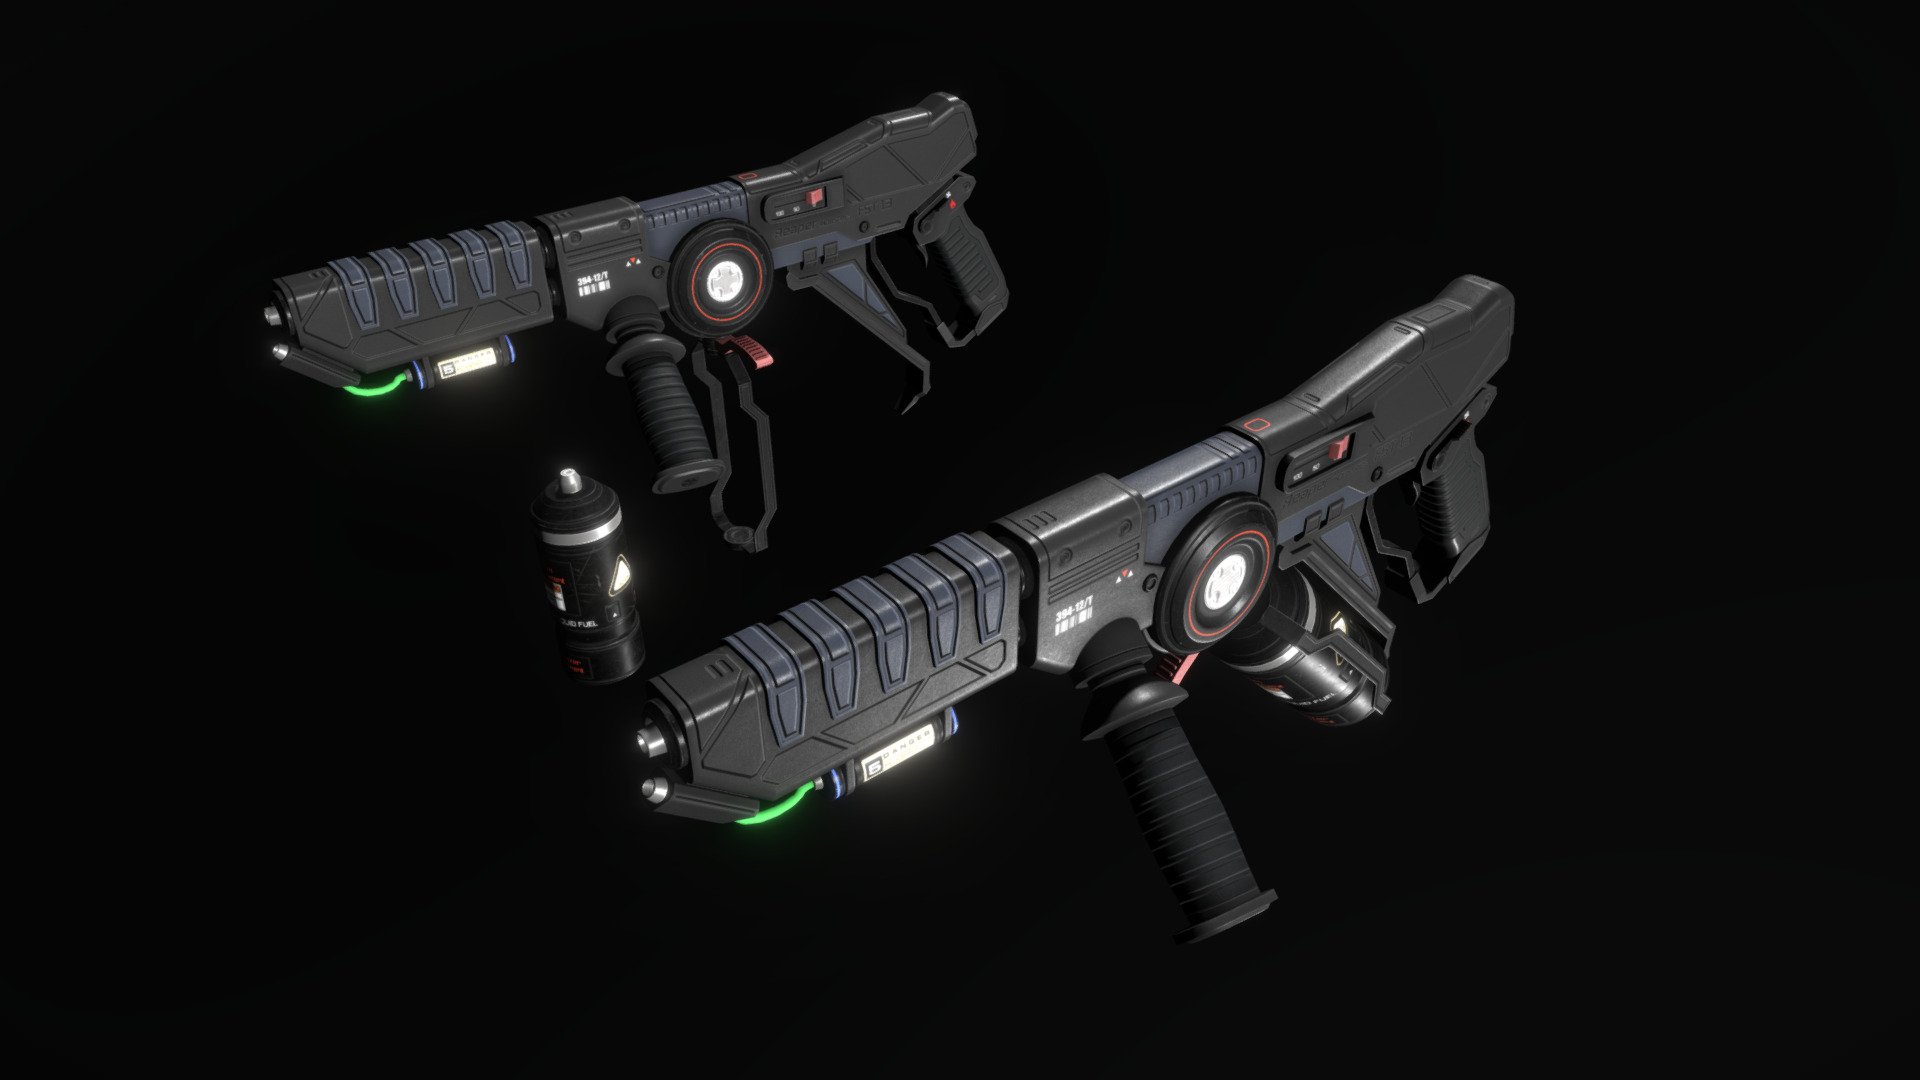 This is a model of a low-poly and game-ready scifi weapon. 

The weapon is composed of separate meshes that can be animated with a keyframe animation tool. 

The model comes with several differently colored texture sets. The PSD file with intact layers is included.

Please note: The textures in the Sketchfab viewer have a reduced resolution to improve Sketchfab loading speed.

If you have bought this model please make sure to download the “additional file”.  It contains FBX and OBJ meshes, full resolution textures and the source PSDs with intact layers. The meshes are separate and can be animated (e.g. firing animations) 3d model